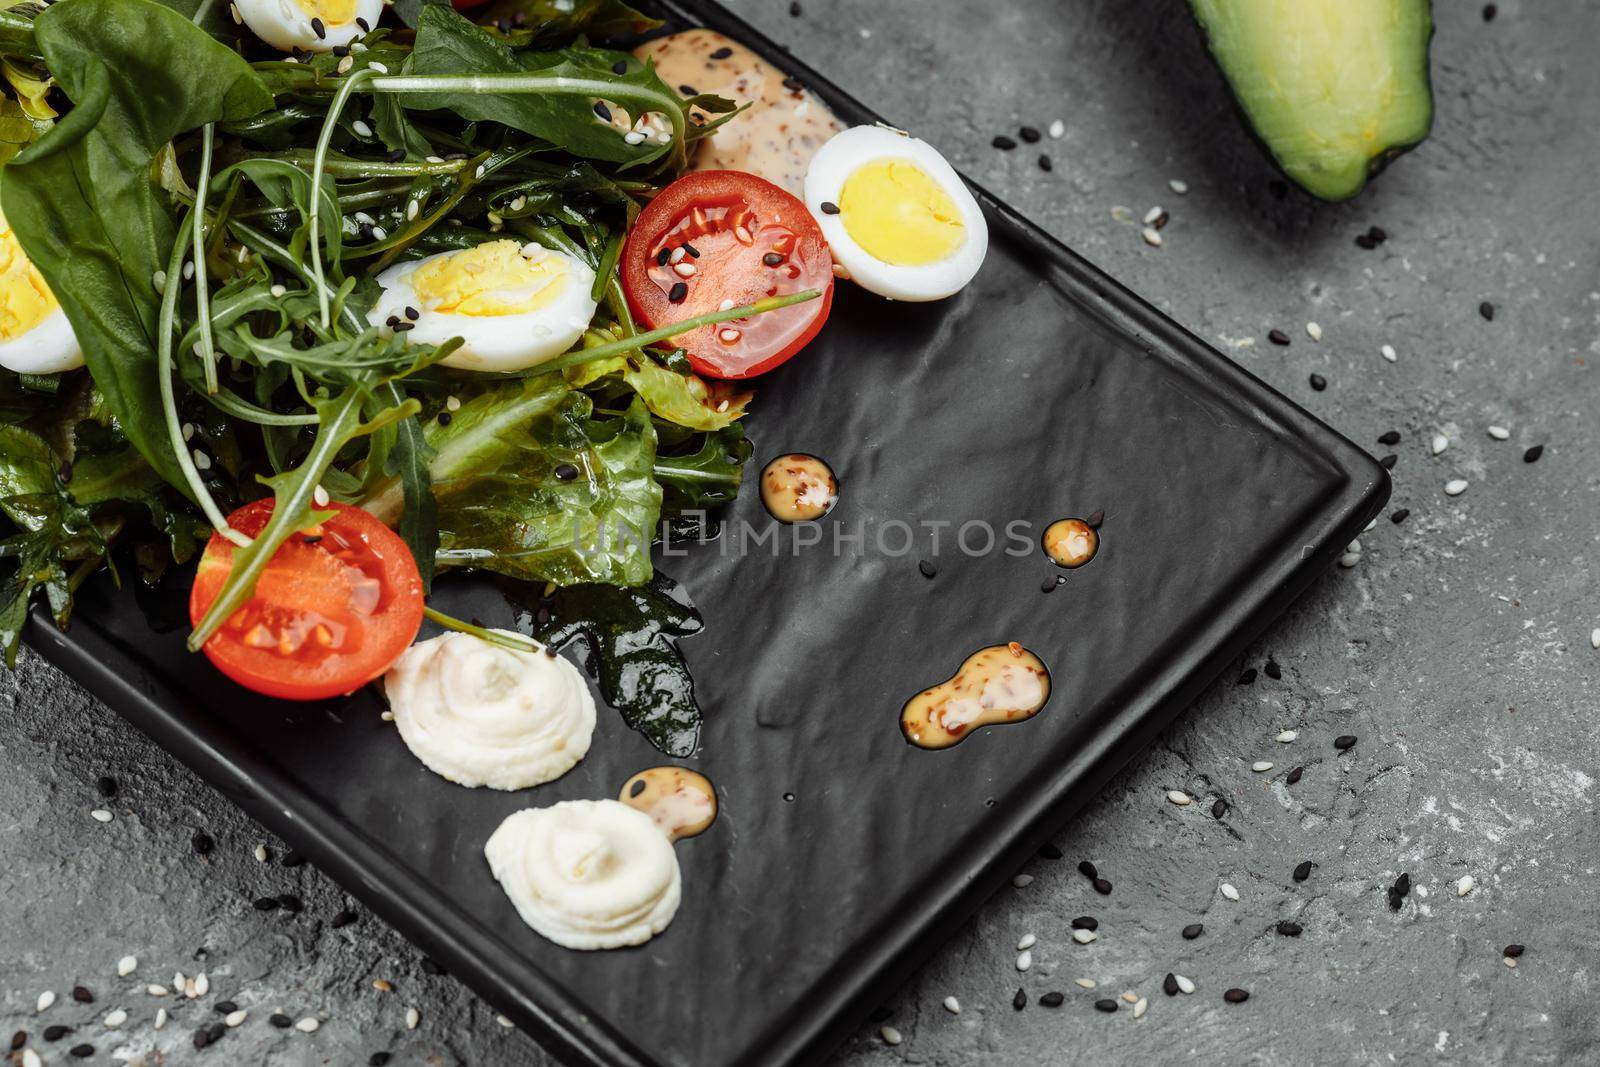 Avocado and cherry tomato salad. Diet breakfast. Healthy food by UcheaD